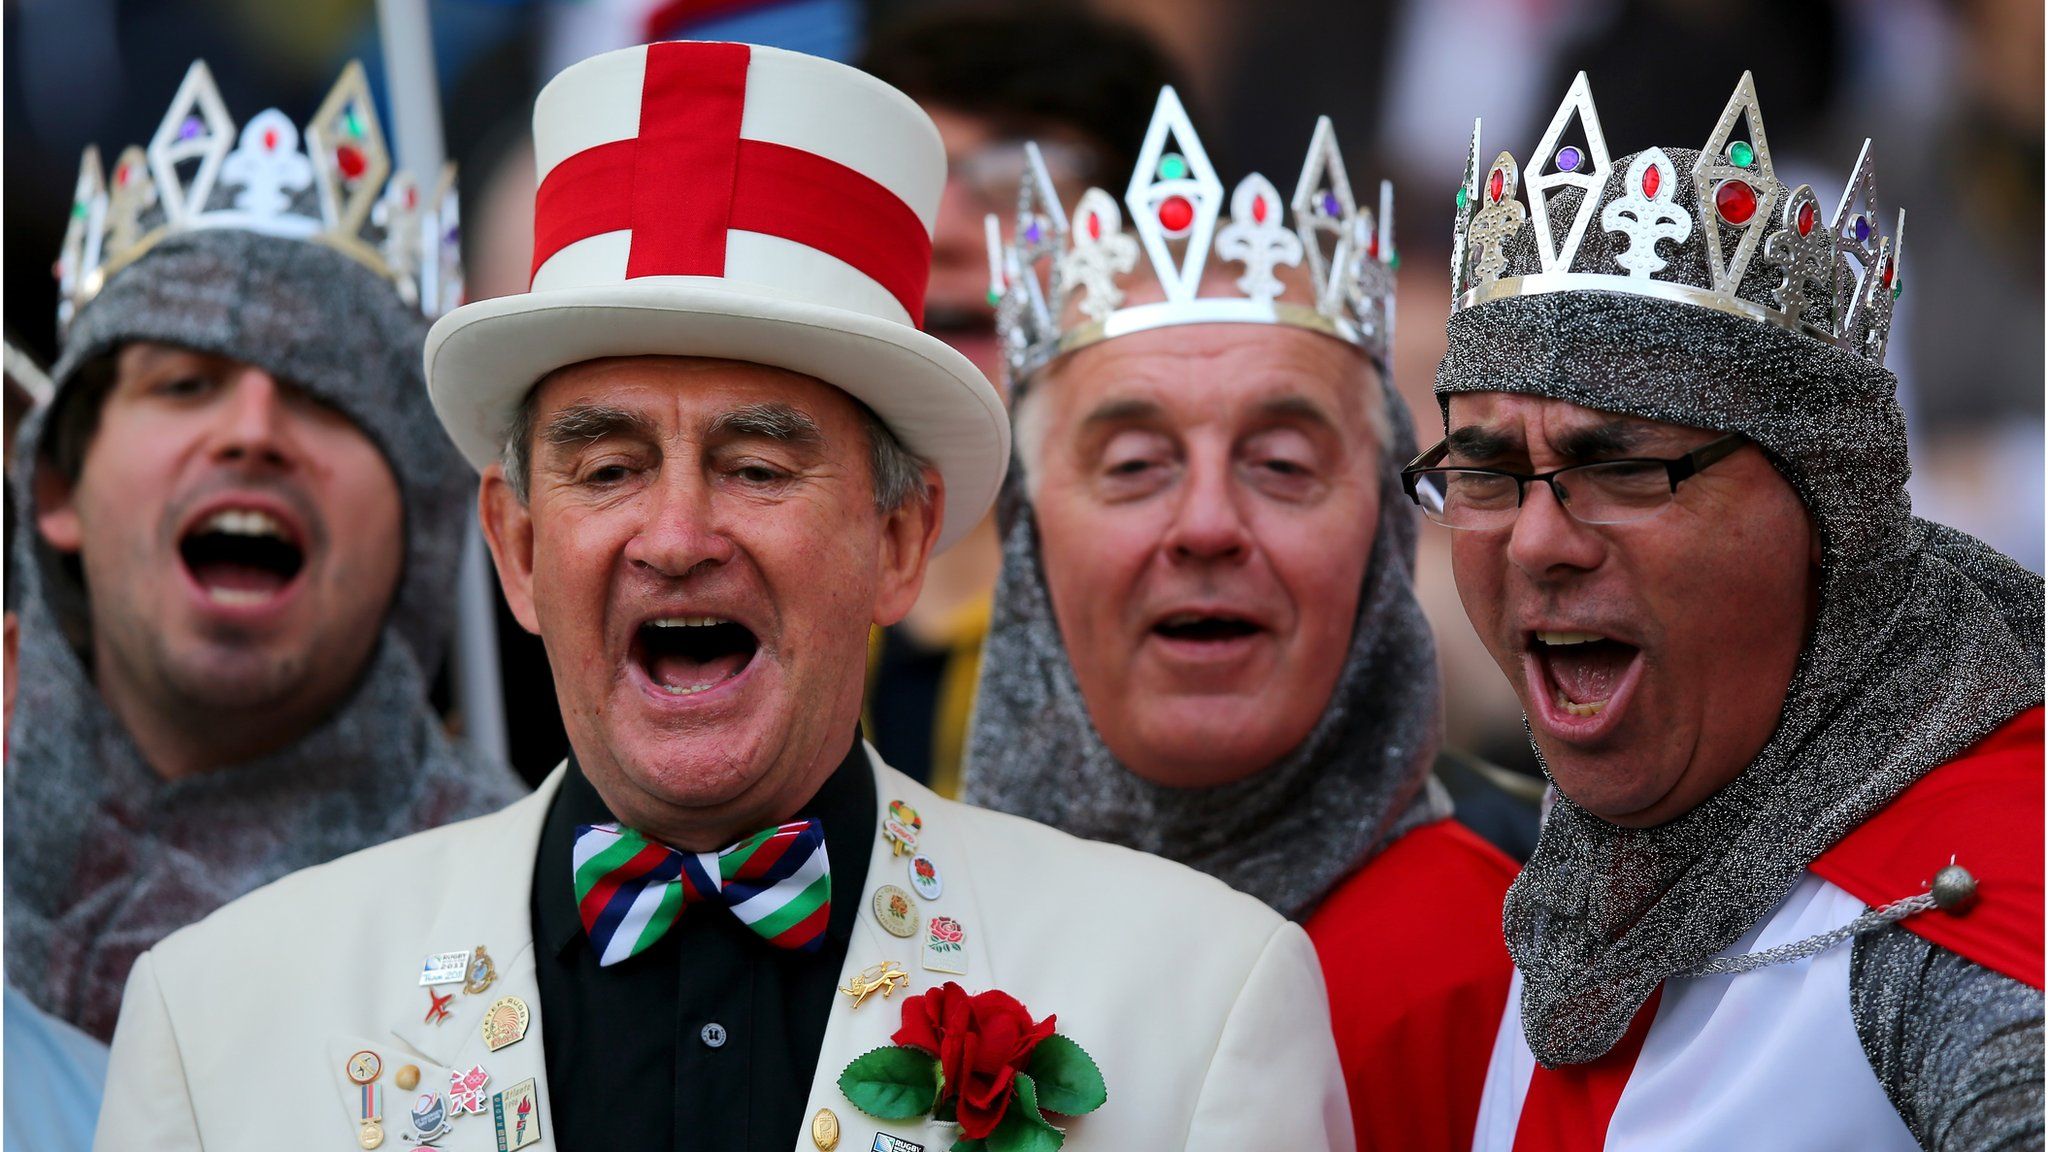 England fans sing during the RBS Six Nations match between Italy and England at the Stadio Olimpico on March 15, 2014 in Rome, Italy